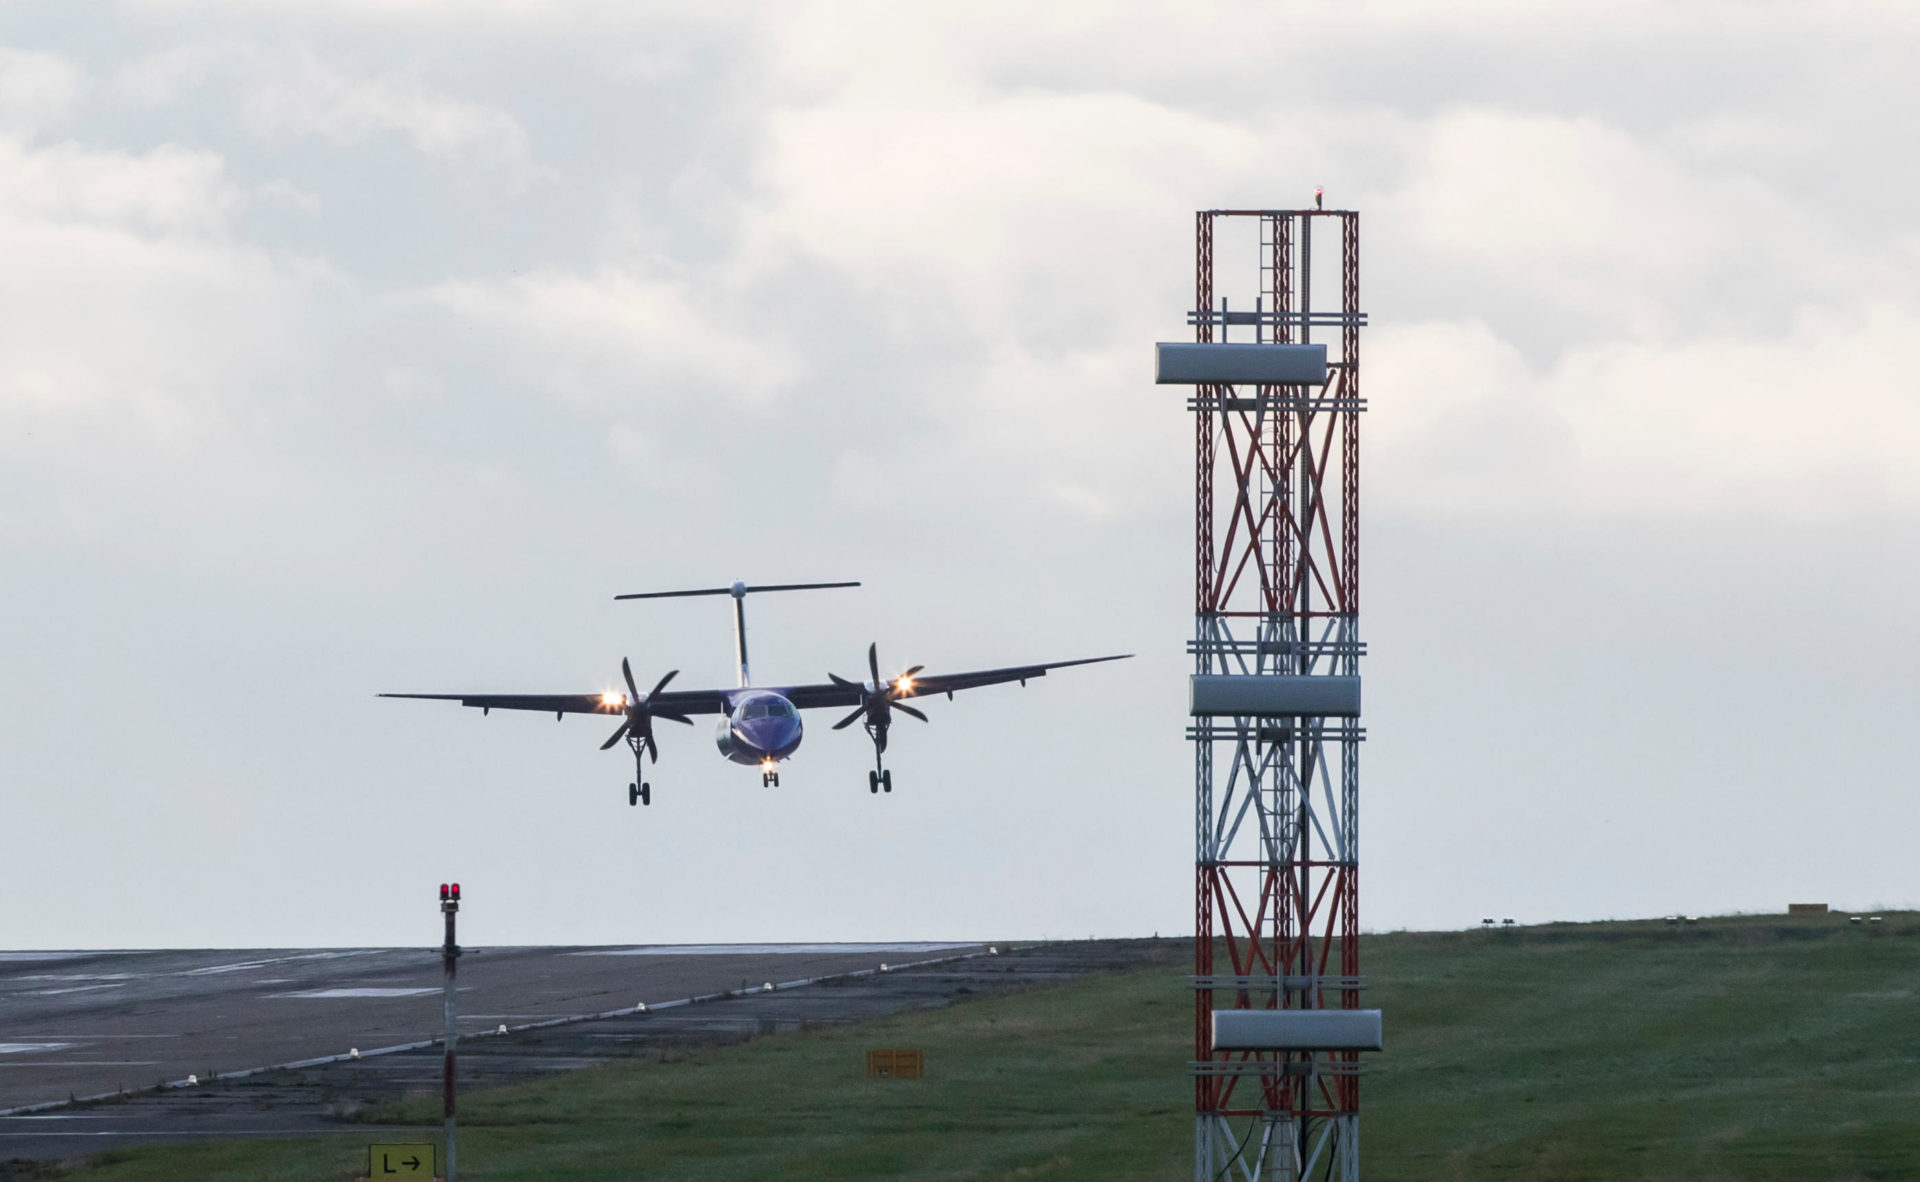 A plane lands at Leeds Bradford Airport as Storm Aileen brings howling gusts and heavy showers to parts of the UK.